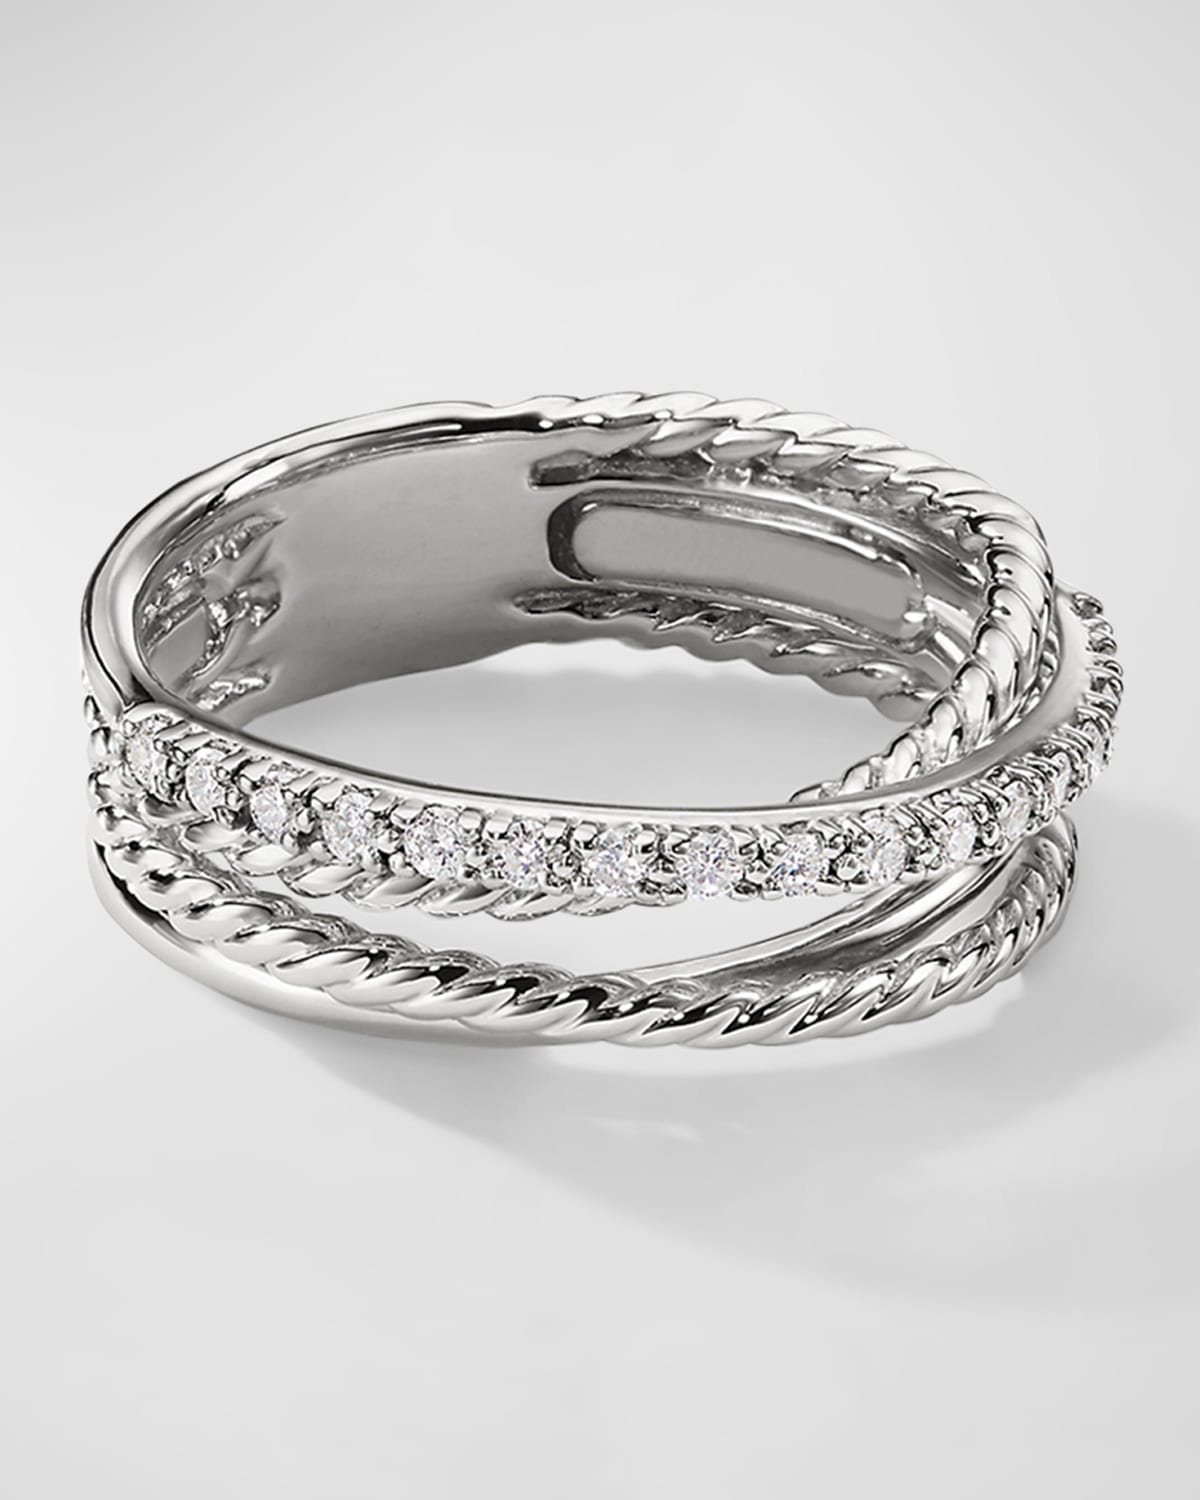 DAVID YURMAN CROSSOVER BAND RING WITH DIAMONDS IN SILVER, 6.8MM